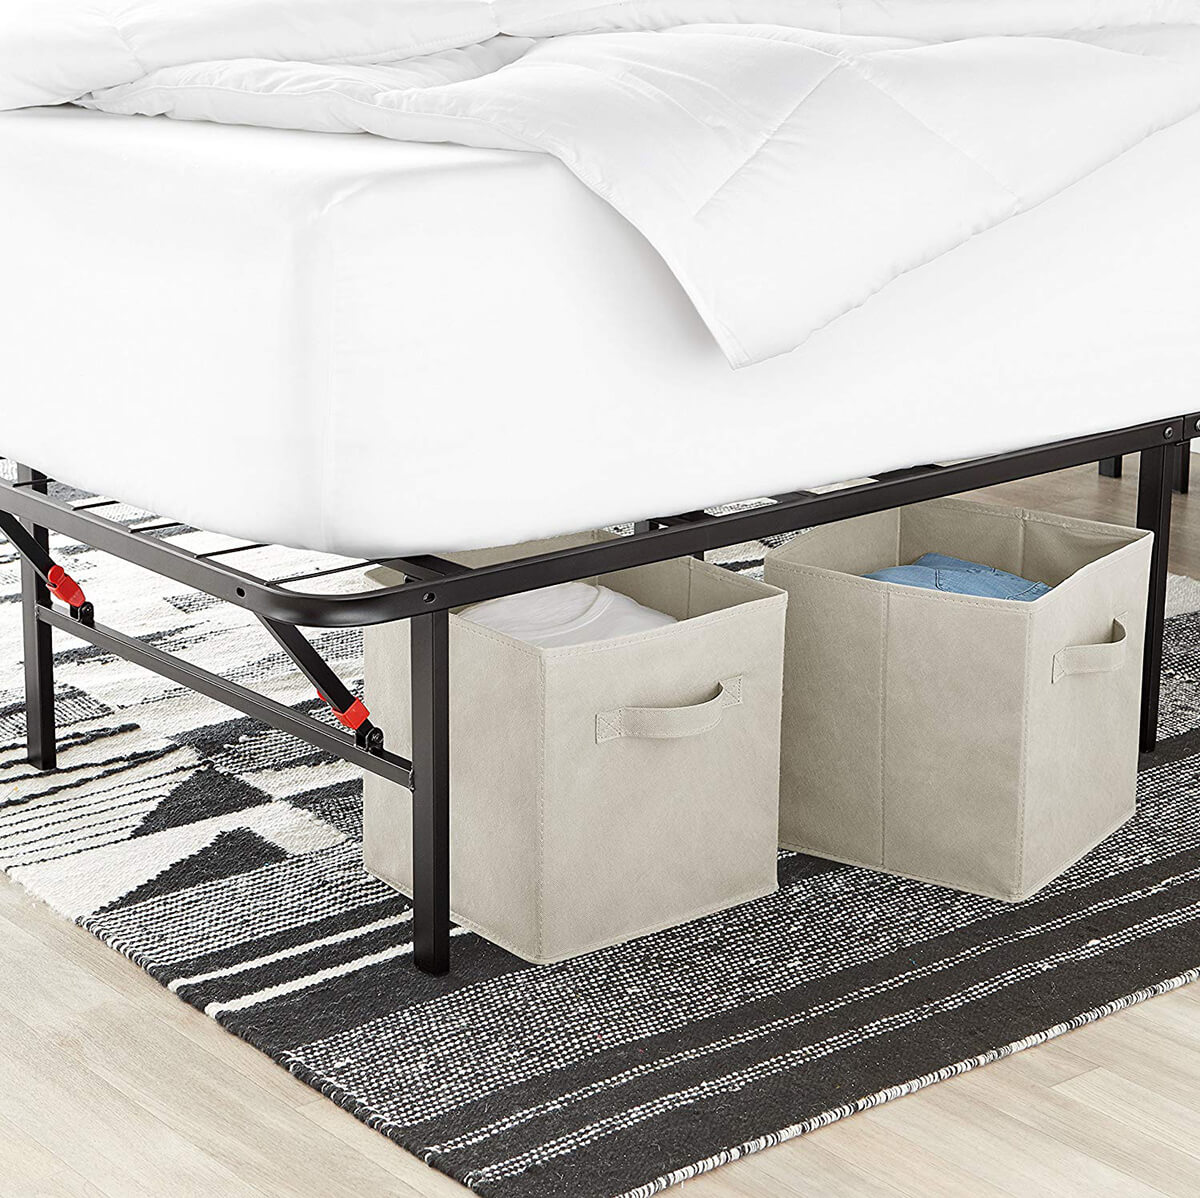 Cloth, Foldable Storage Cubes for Design and Functionality